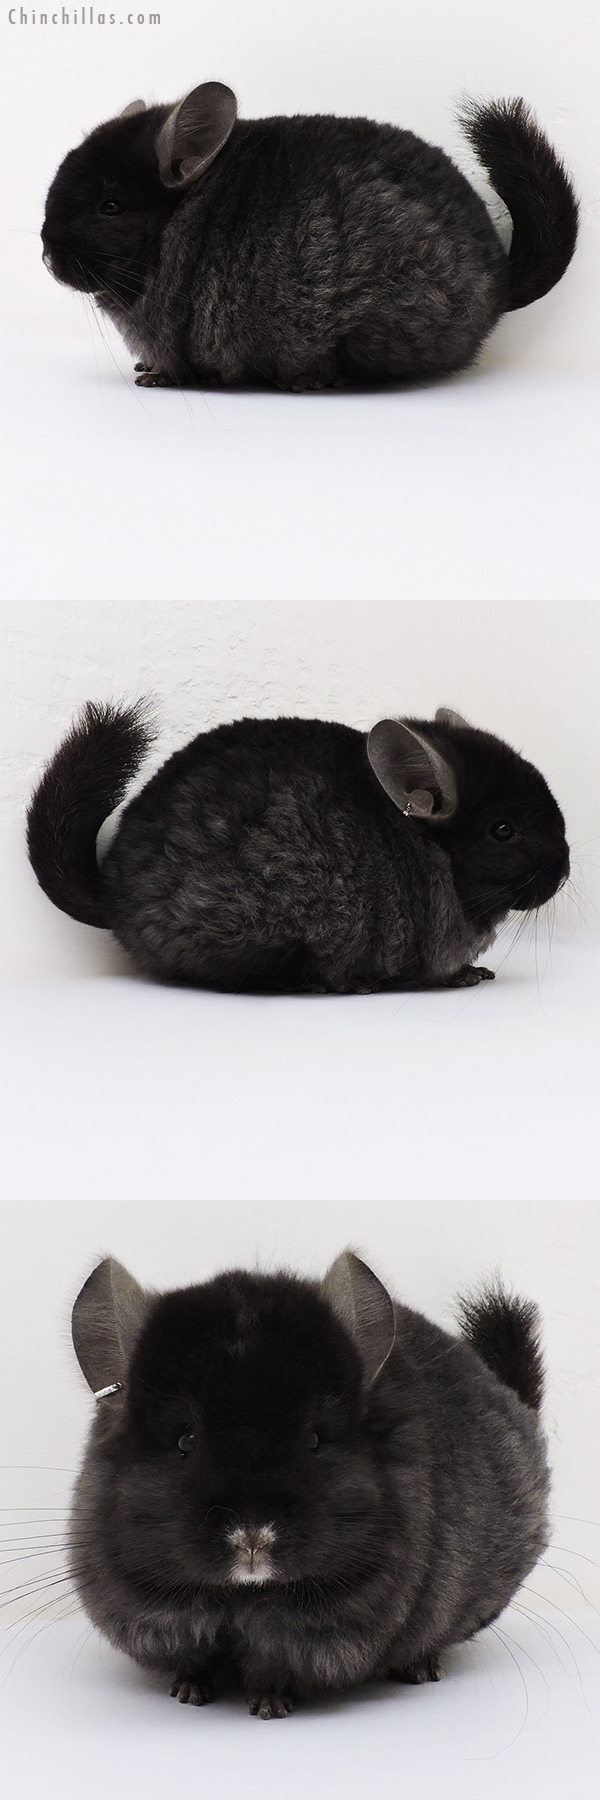 Chinchilla or related item offered for sale or export on Chinchillas.com - 17051 Blocky Ebony  Royal Imperial Angora Male Chinchilla